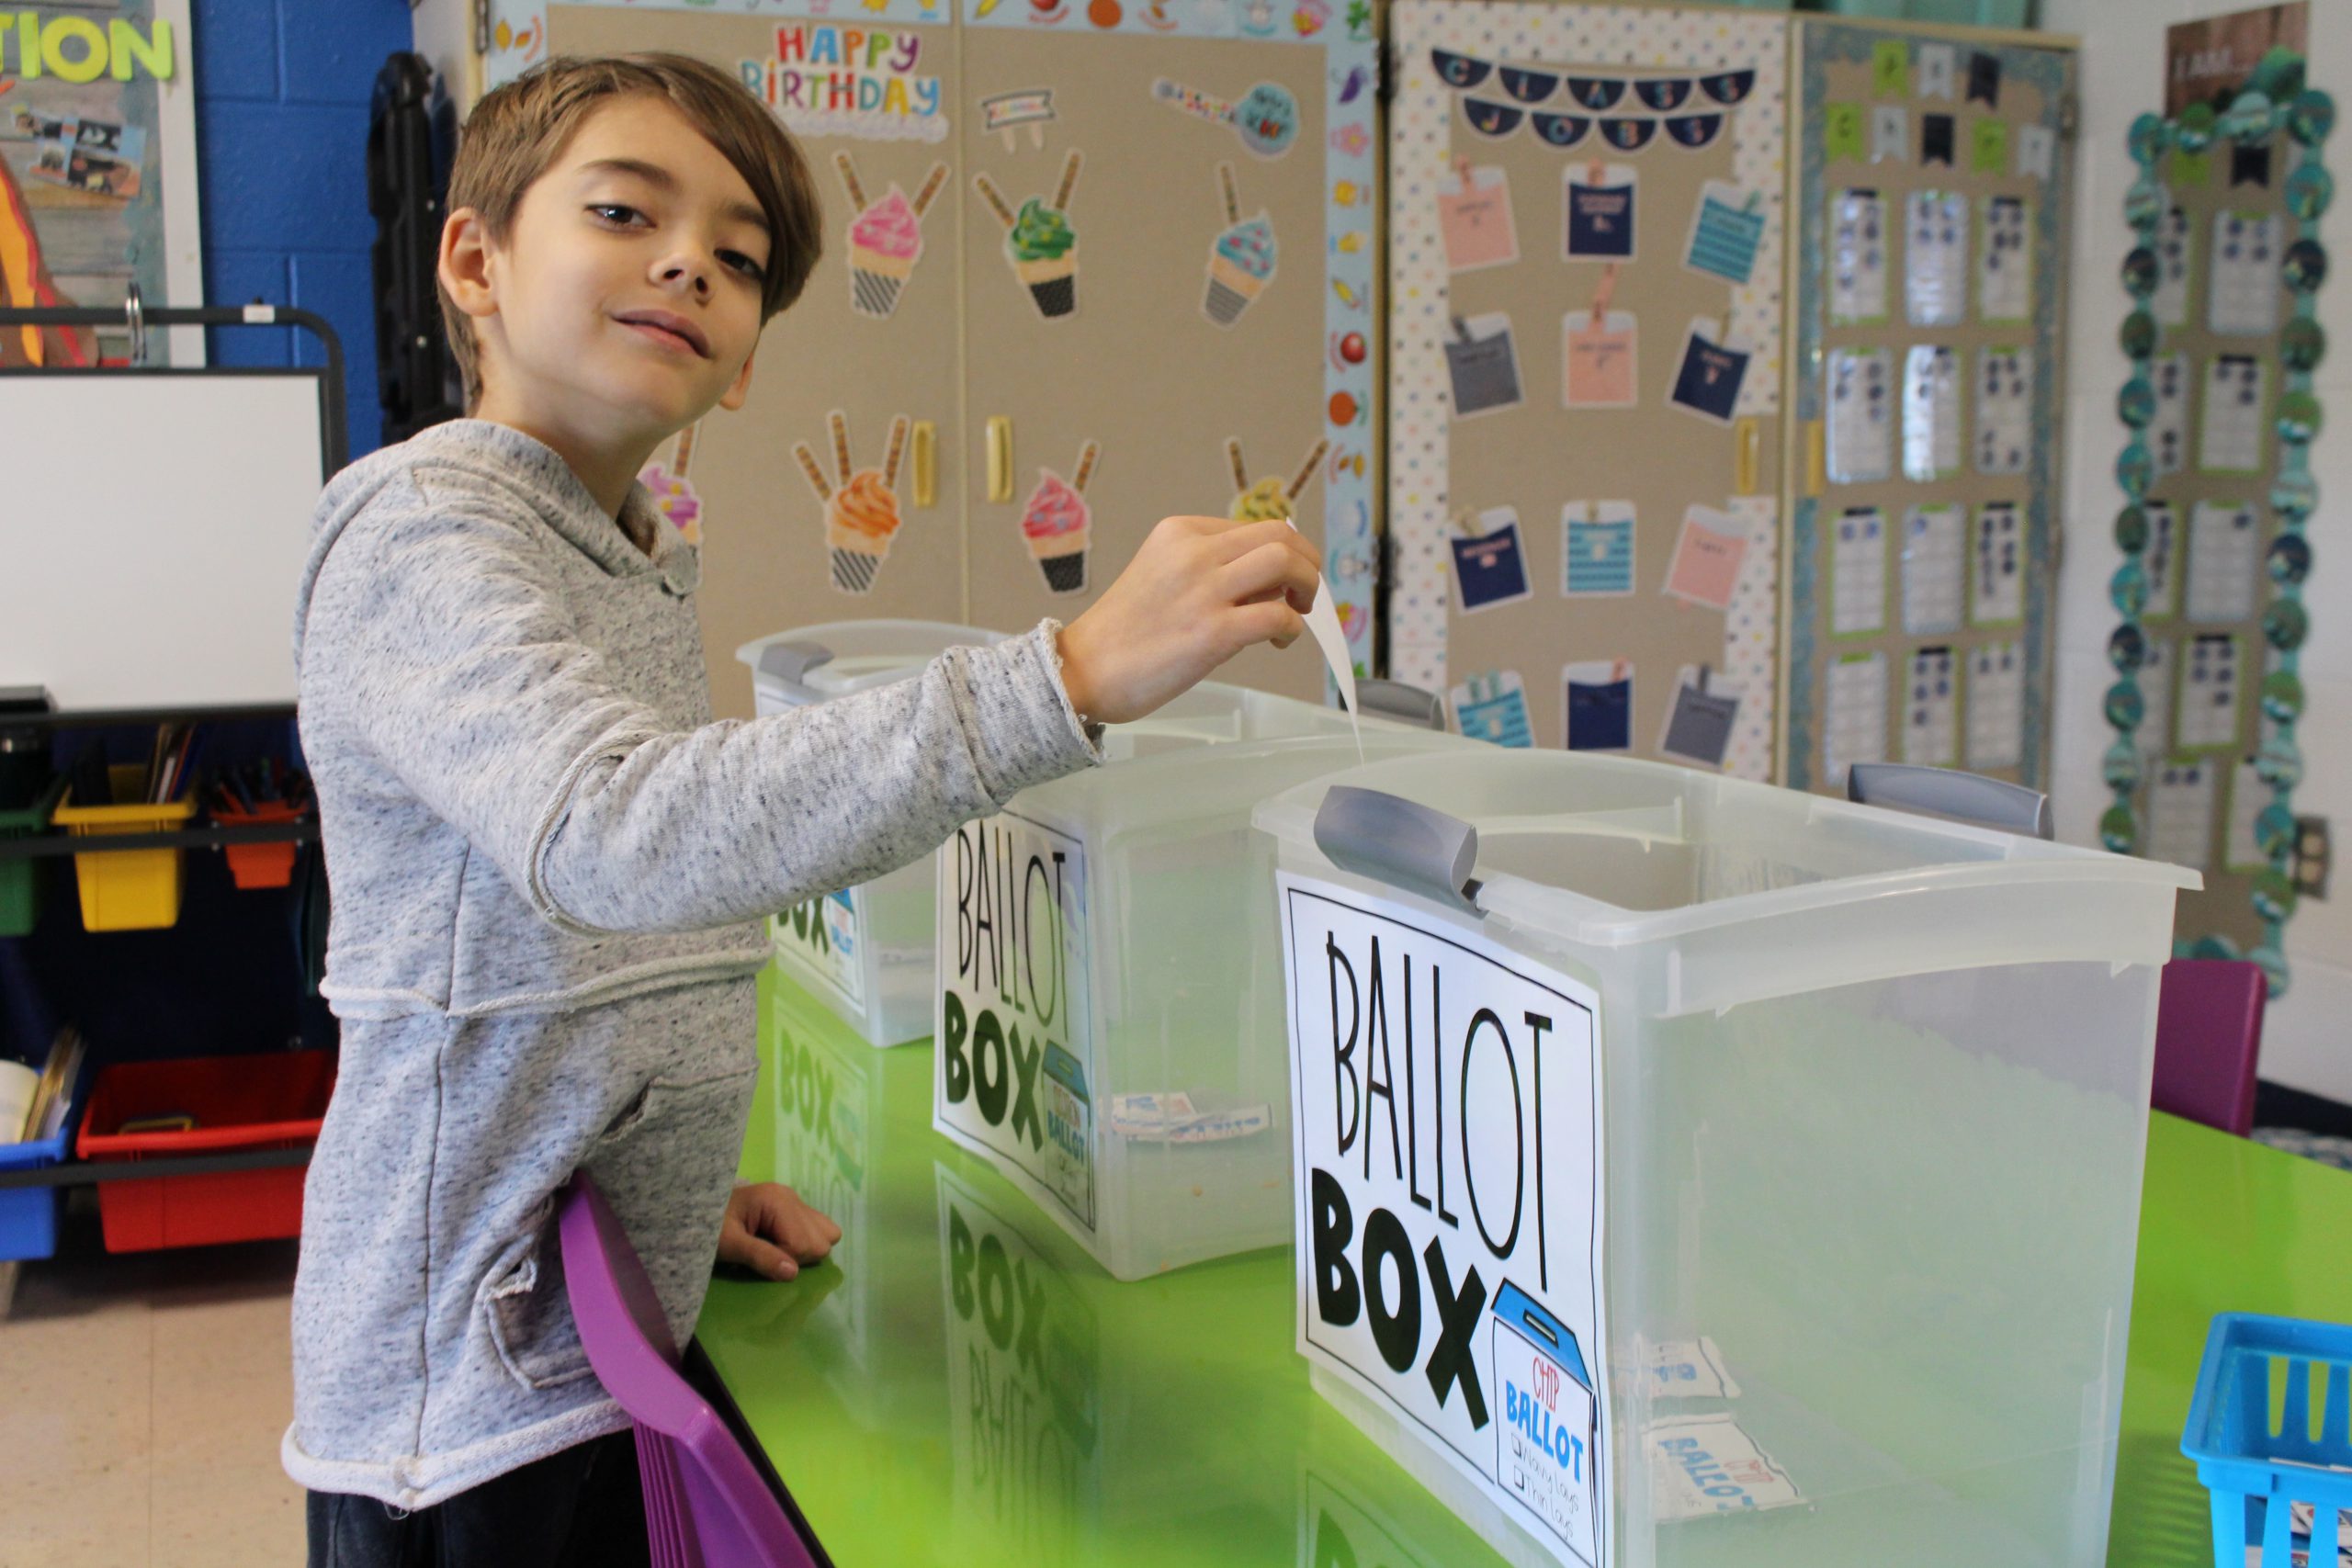 a boy is smiling. He is about to drop a ballot into a box that says "ballot box"